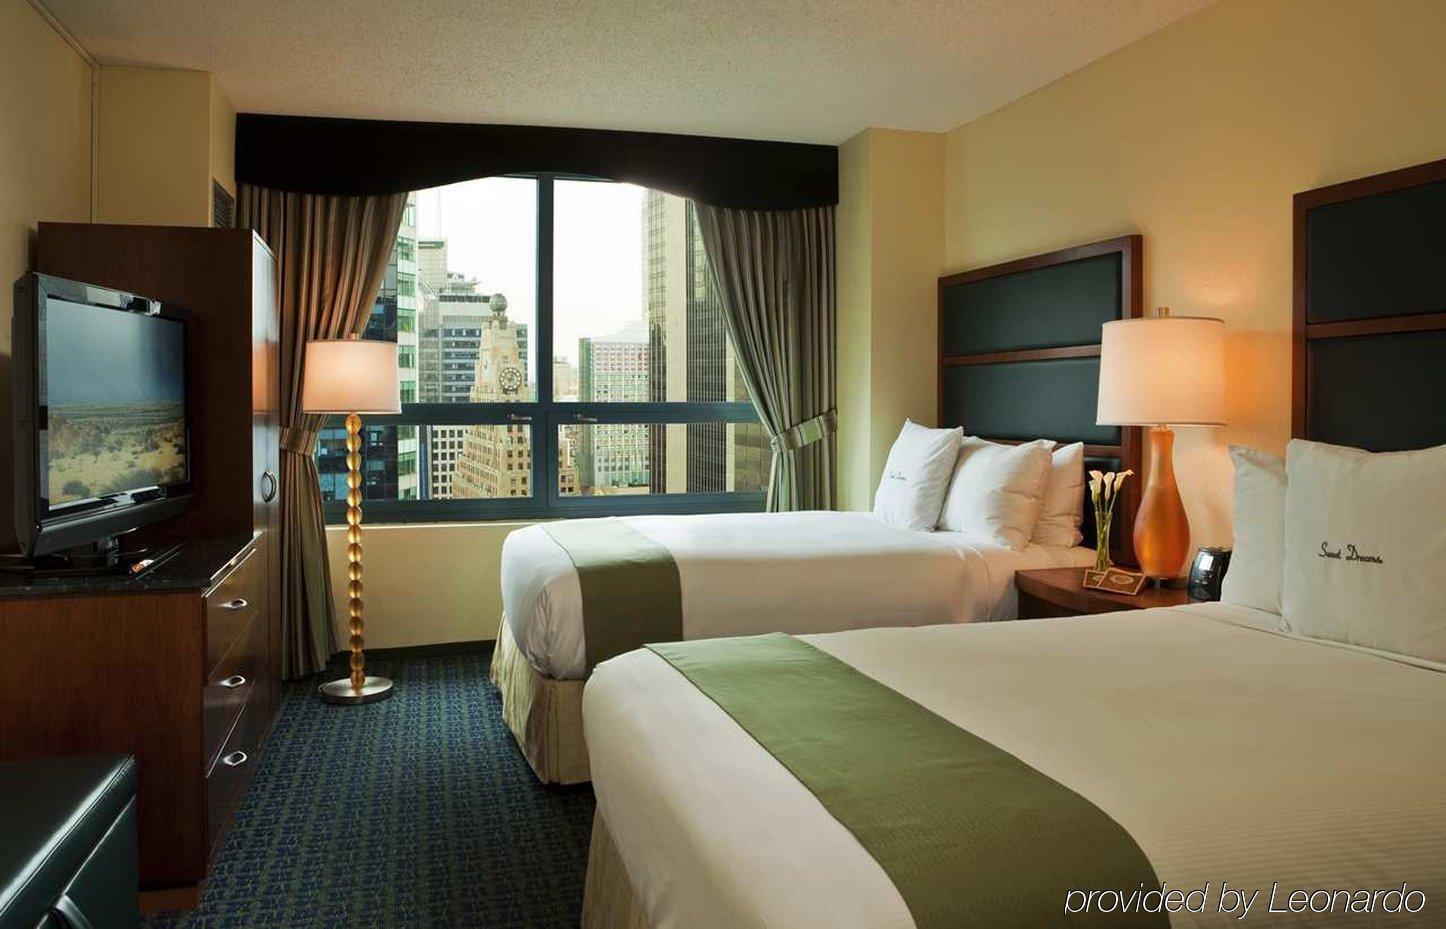 Doubletree Suites By Hilton Nyc - Times Square New York Zimmer foto